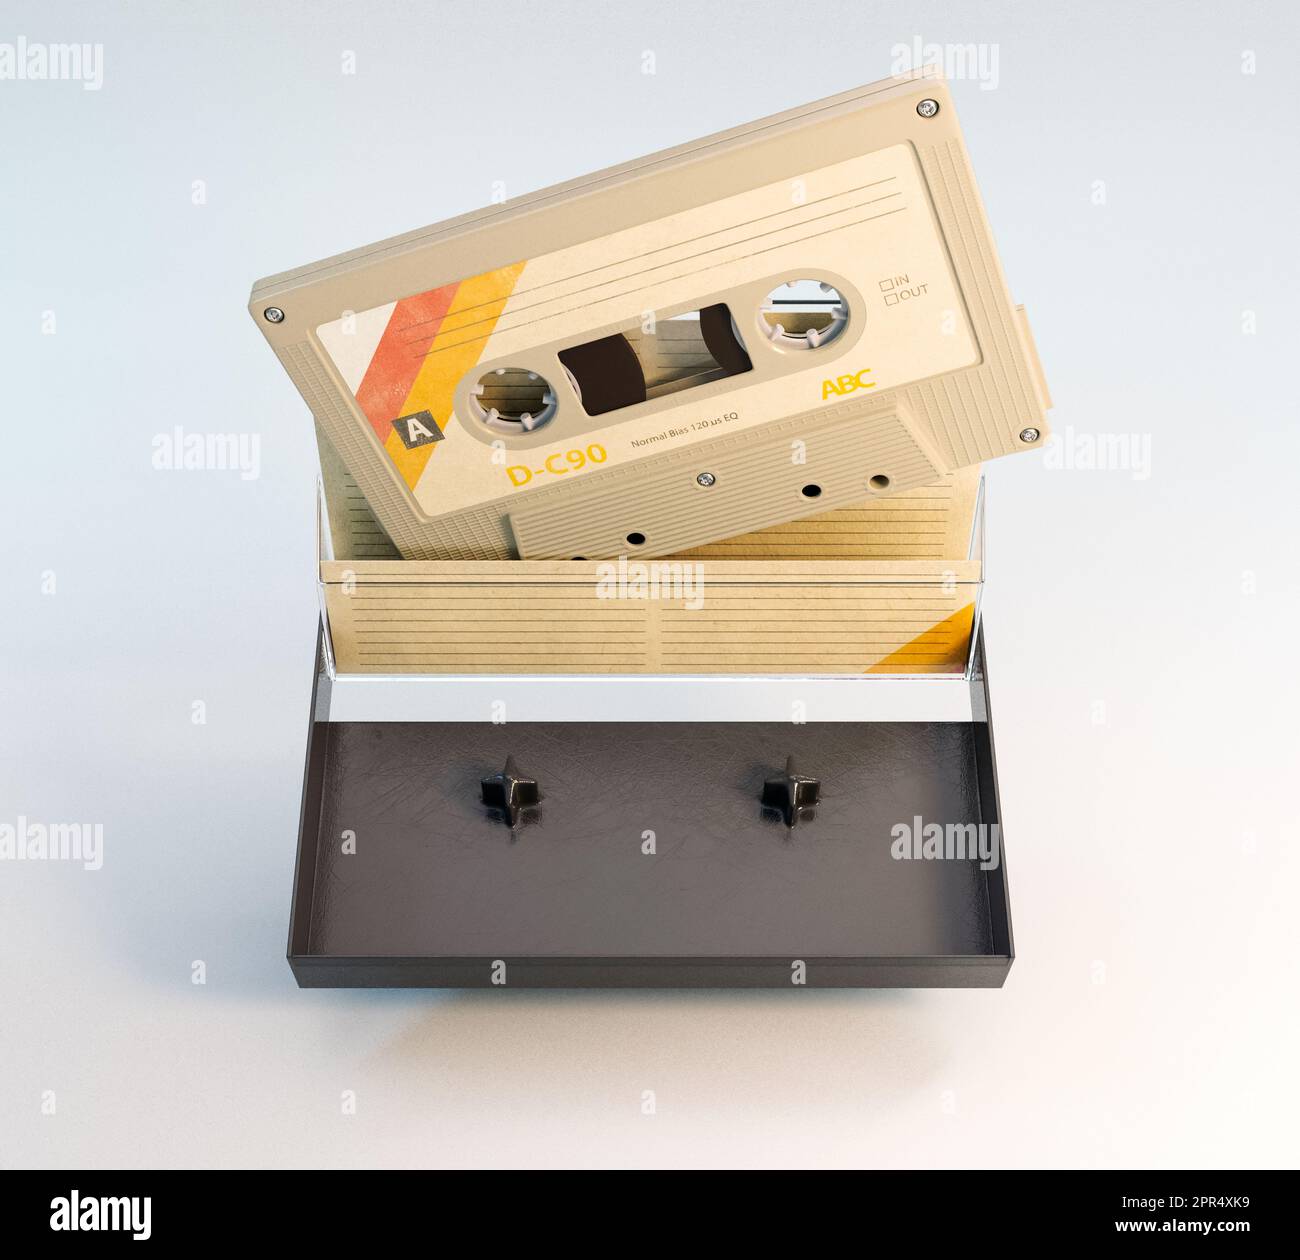 A concept of a recordable aduio cassette tape with a platic cover and cardboard insert - 3D render Stock Photo